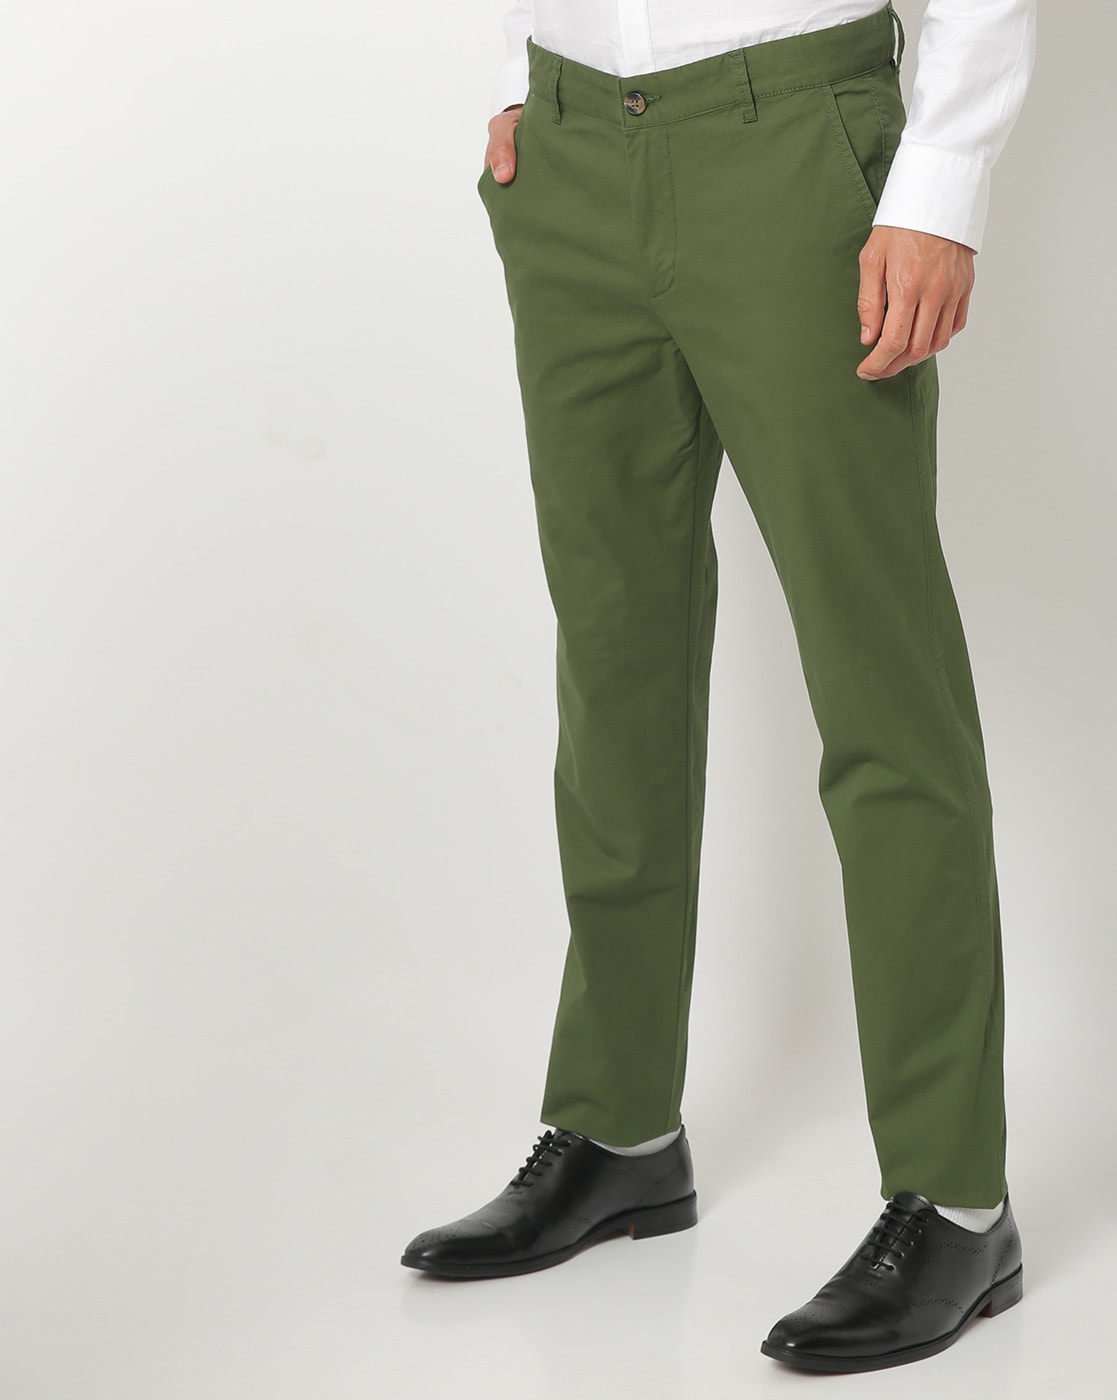 Green Pants Outfit / Suit Dress To Impress The Pants Of Your Dreams | Men  fashion casual shirts, Shirt outfit men, Mens business casual outfits